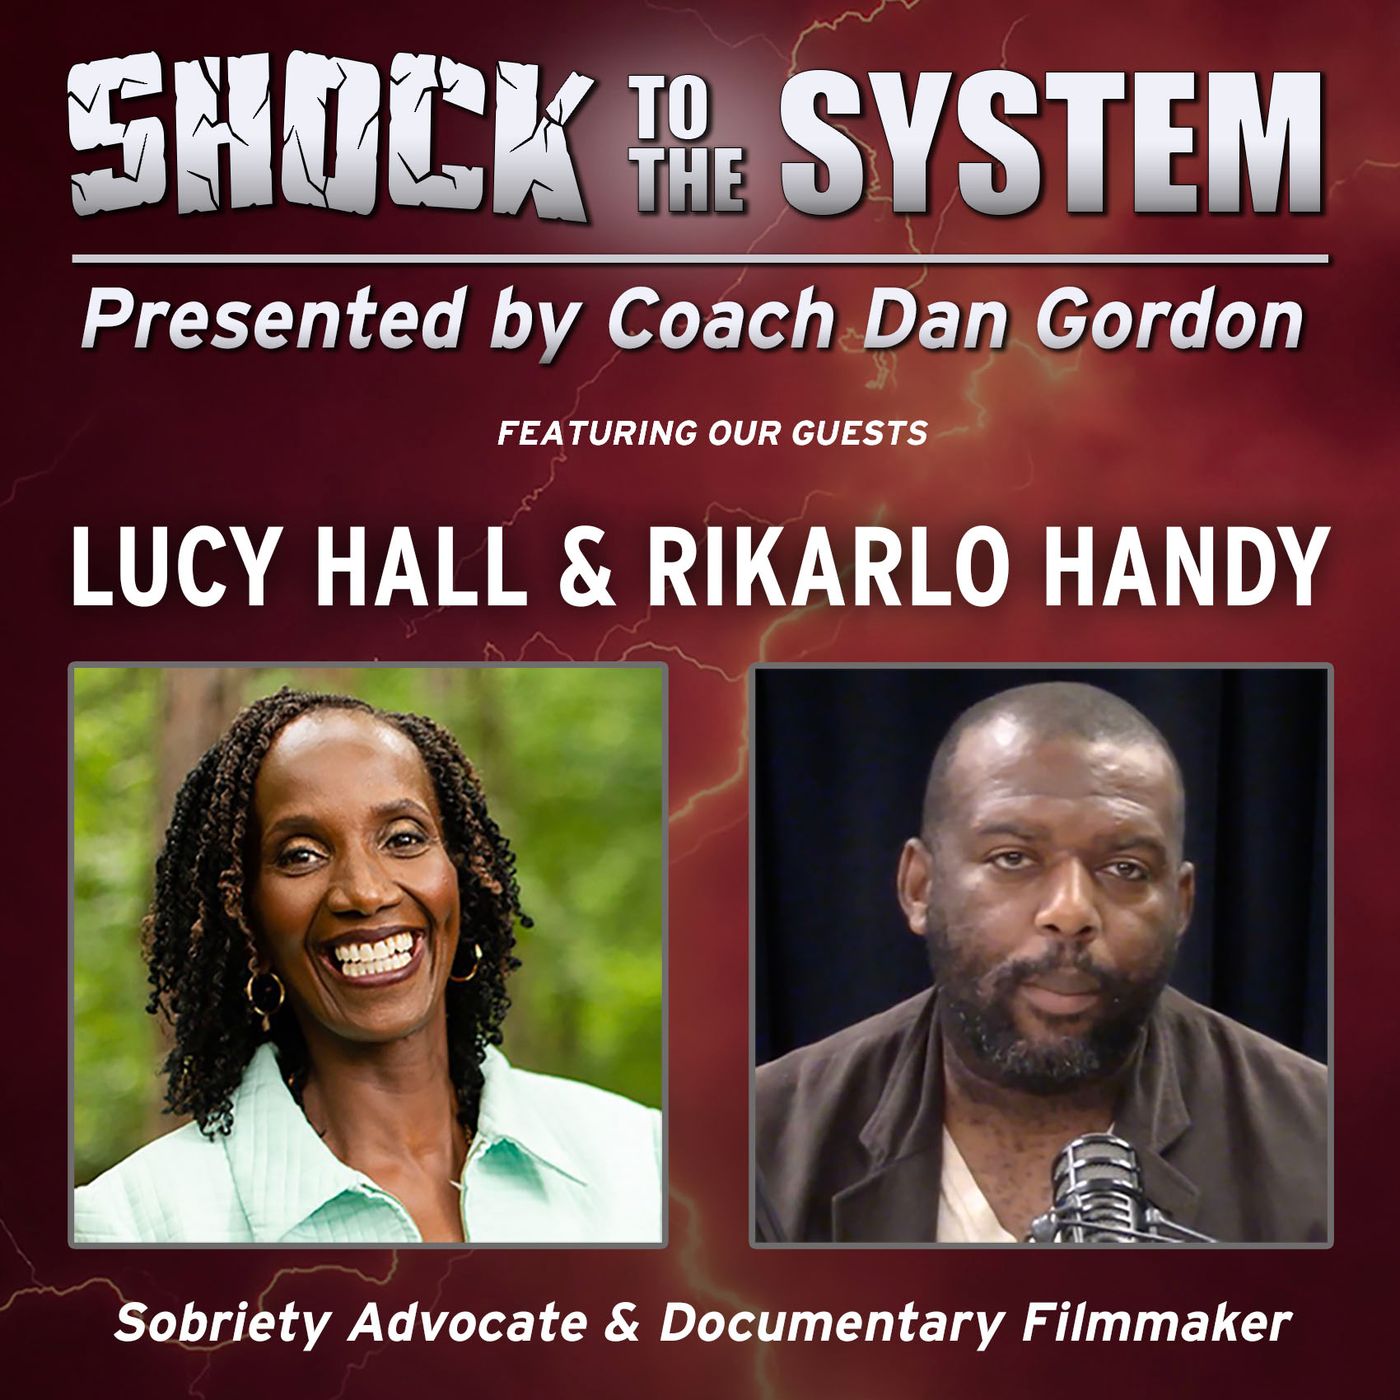 Lucy Hall & RiKarlo Handy - Sobriety’s Savior on Shock to the System Podcast - with Coach Dan Gordon